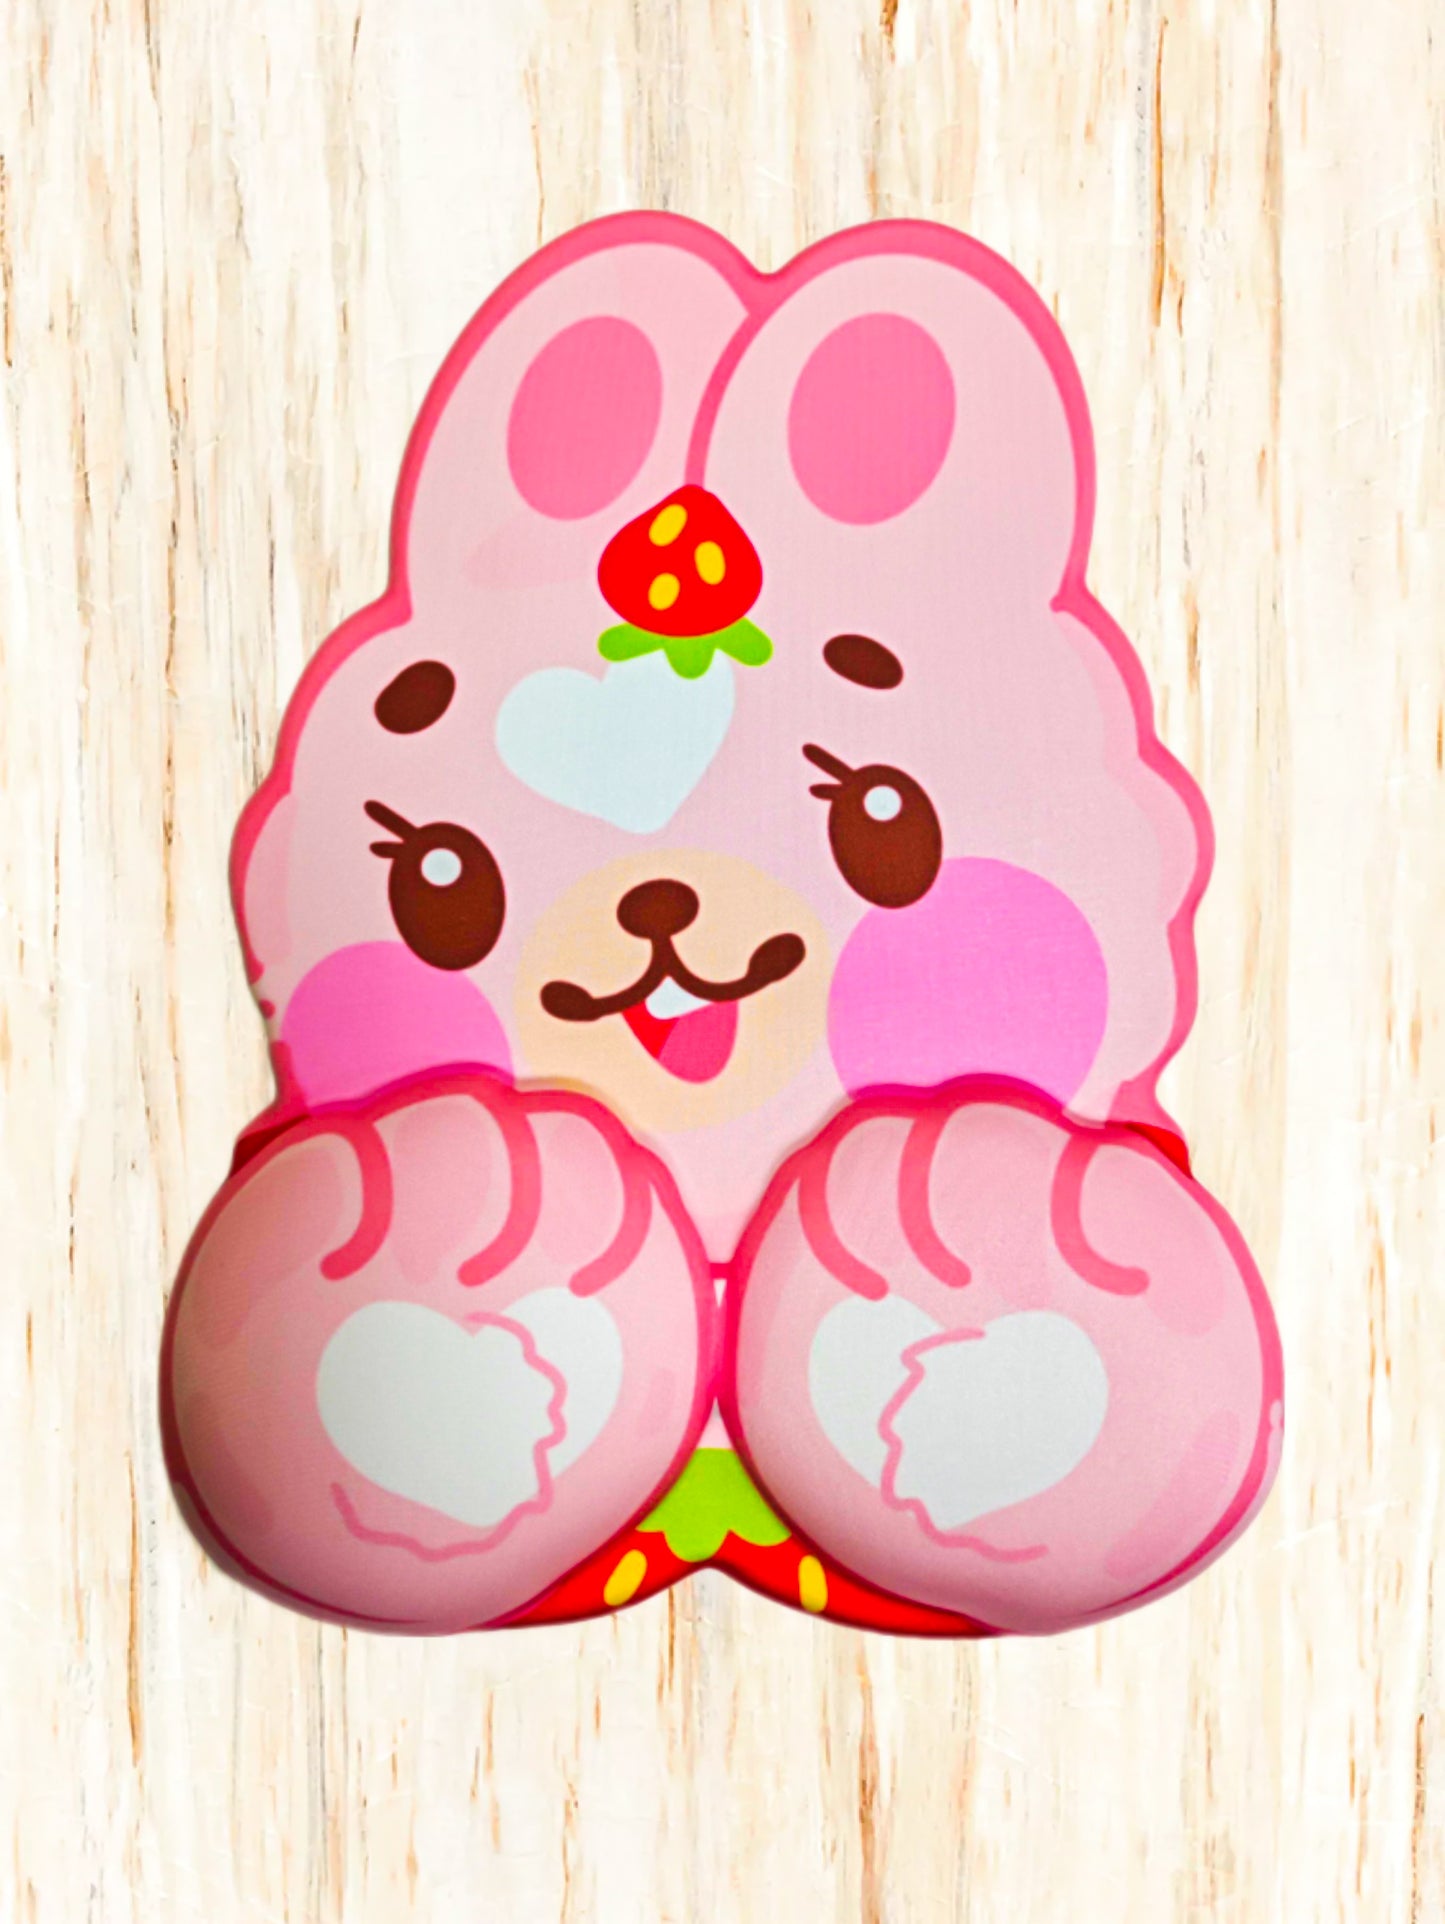 Strawbunny "Paws-Out" Wrist Rest MousePad